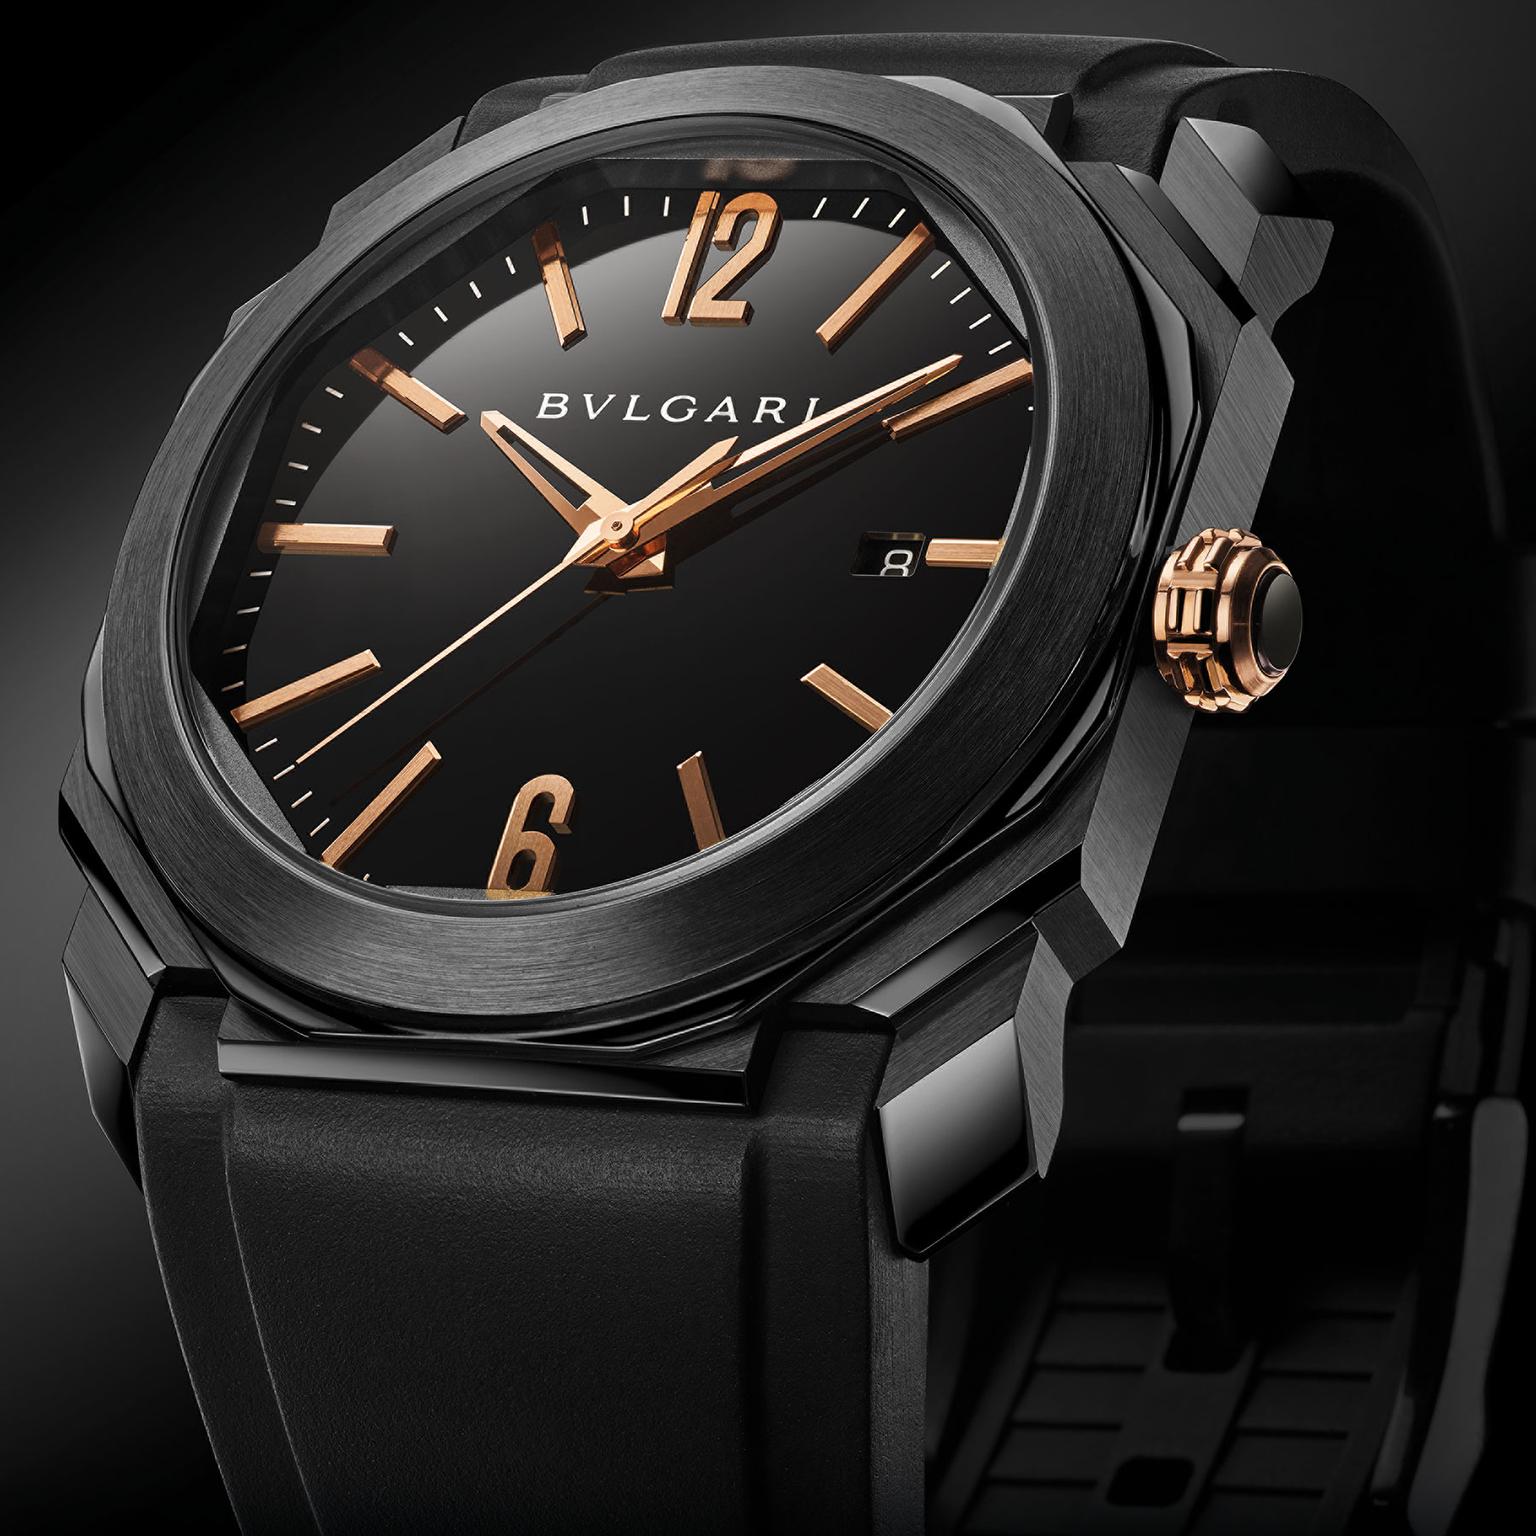 The All Black mens watches from Hublot and more The Jewellery Editor